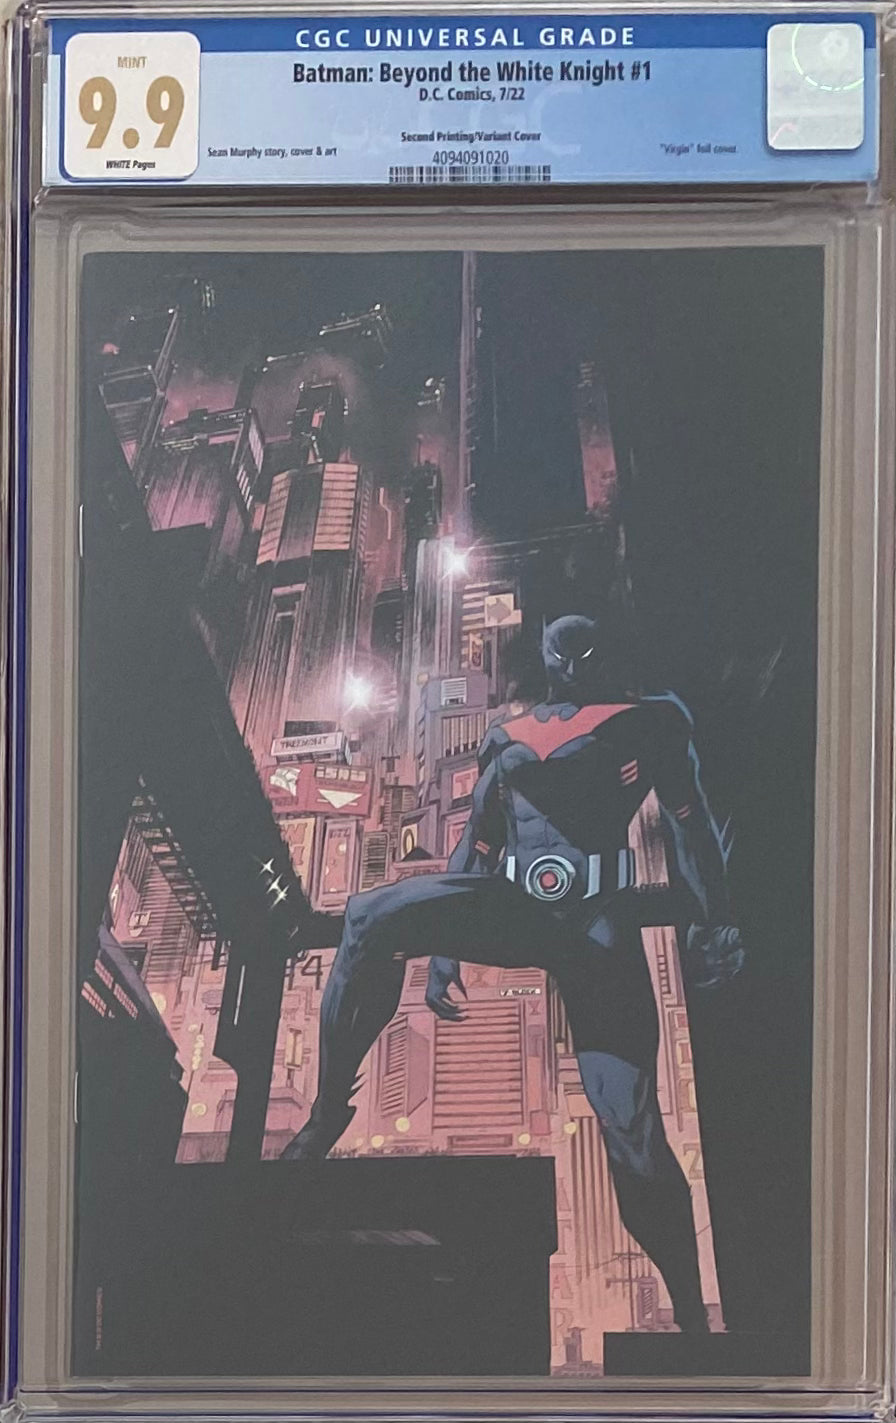 Batman: Beyond the White Knight #1 Second Printing Murphy 1:25 Foil Retailer Incentive Variant CGC 9.9 MINT